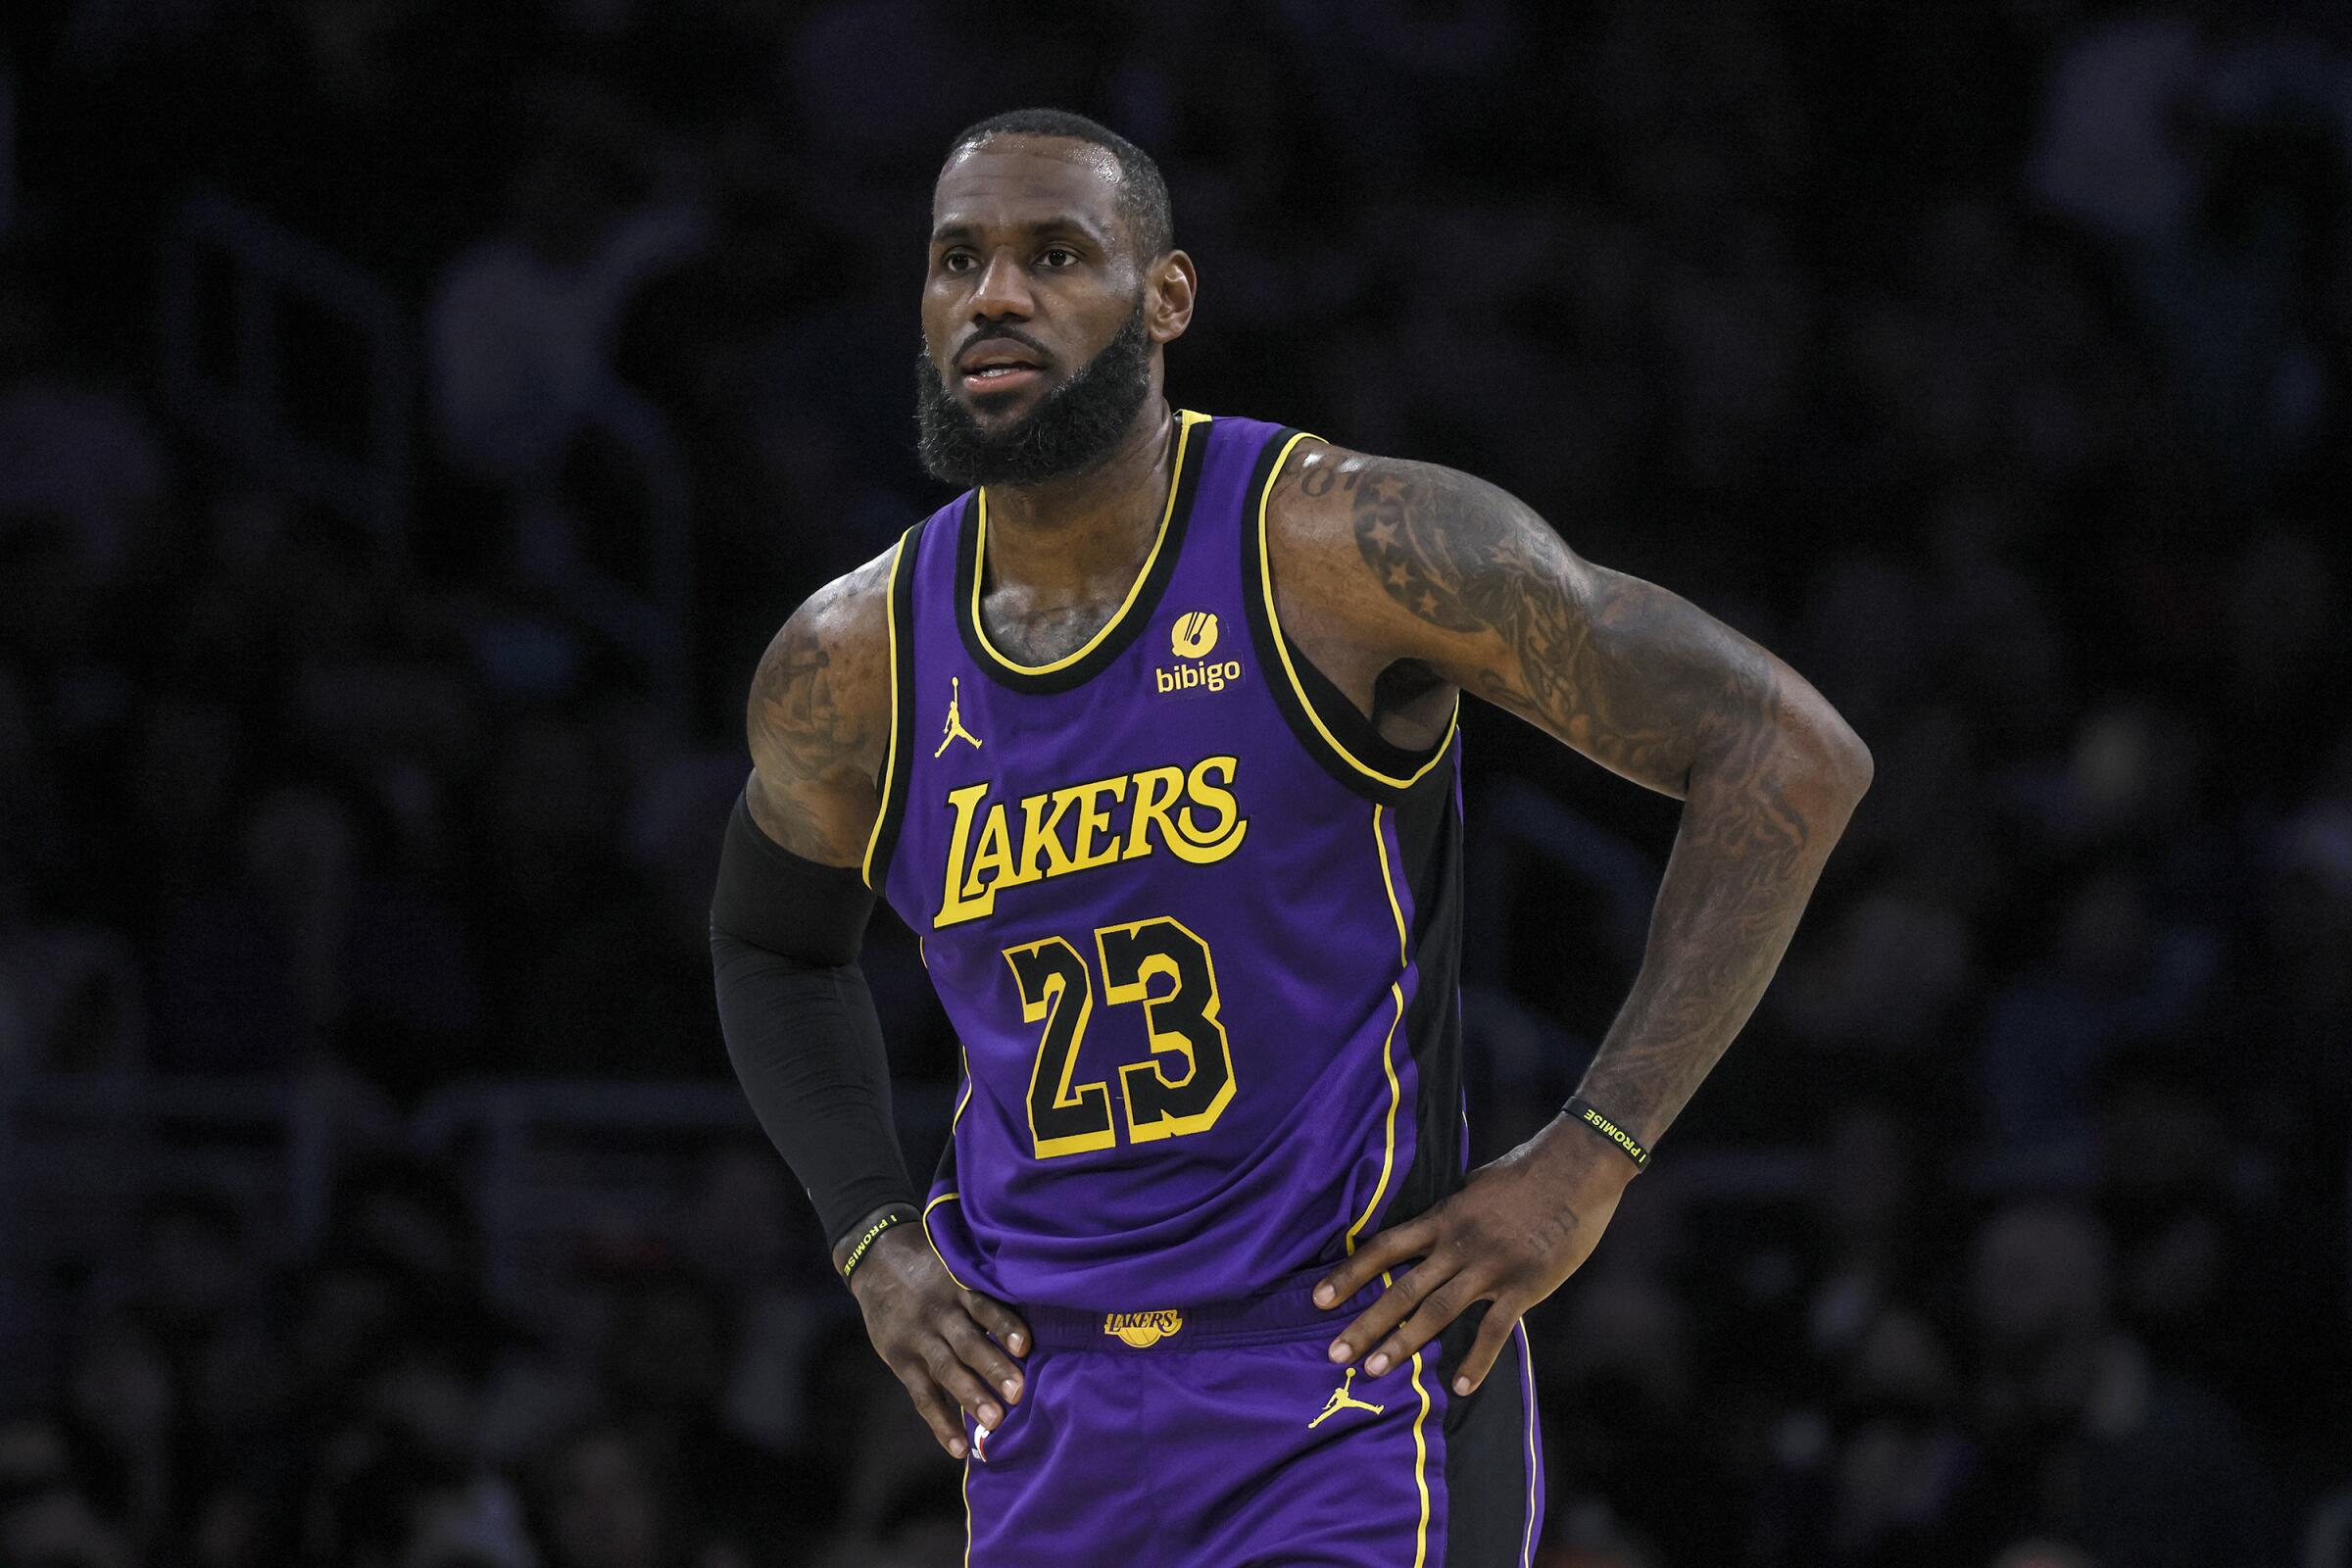 Lakers star LeBron James stands on the court during a game against the Phoenix Suns on Jan. 11.